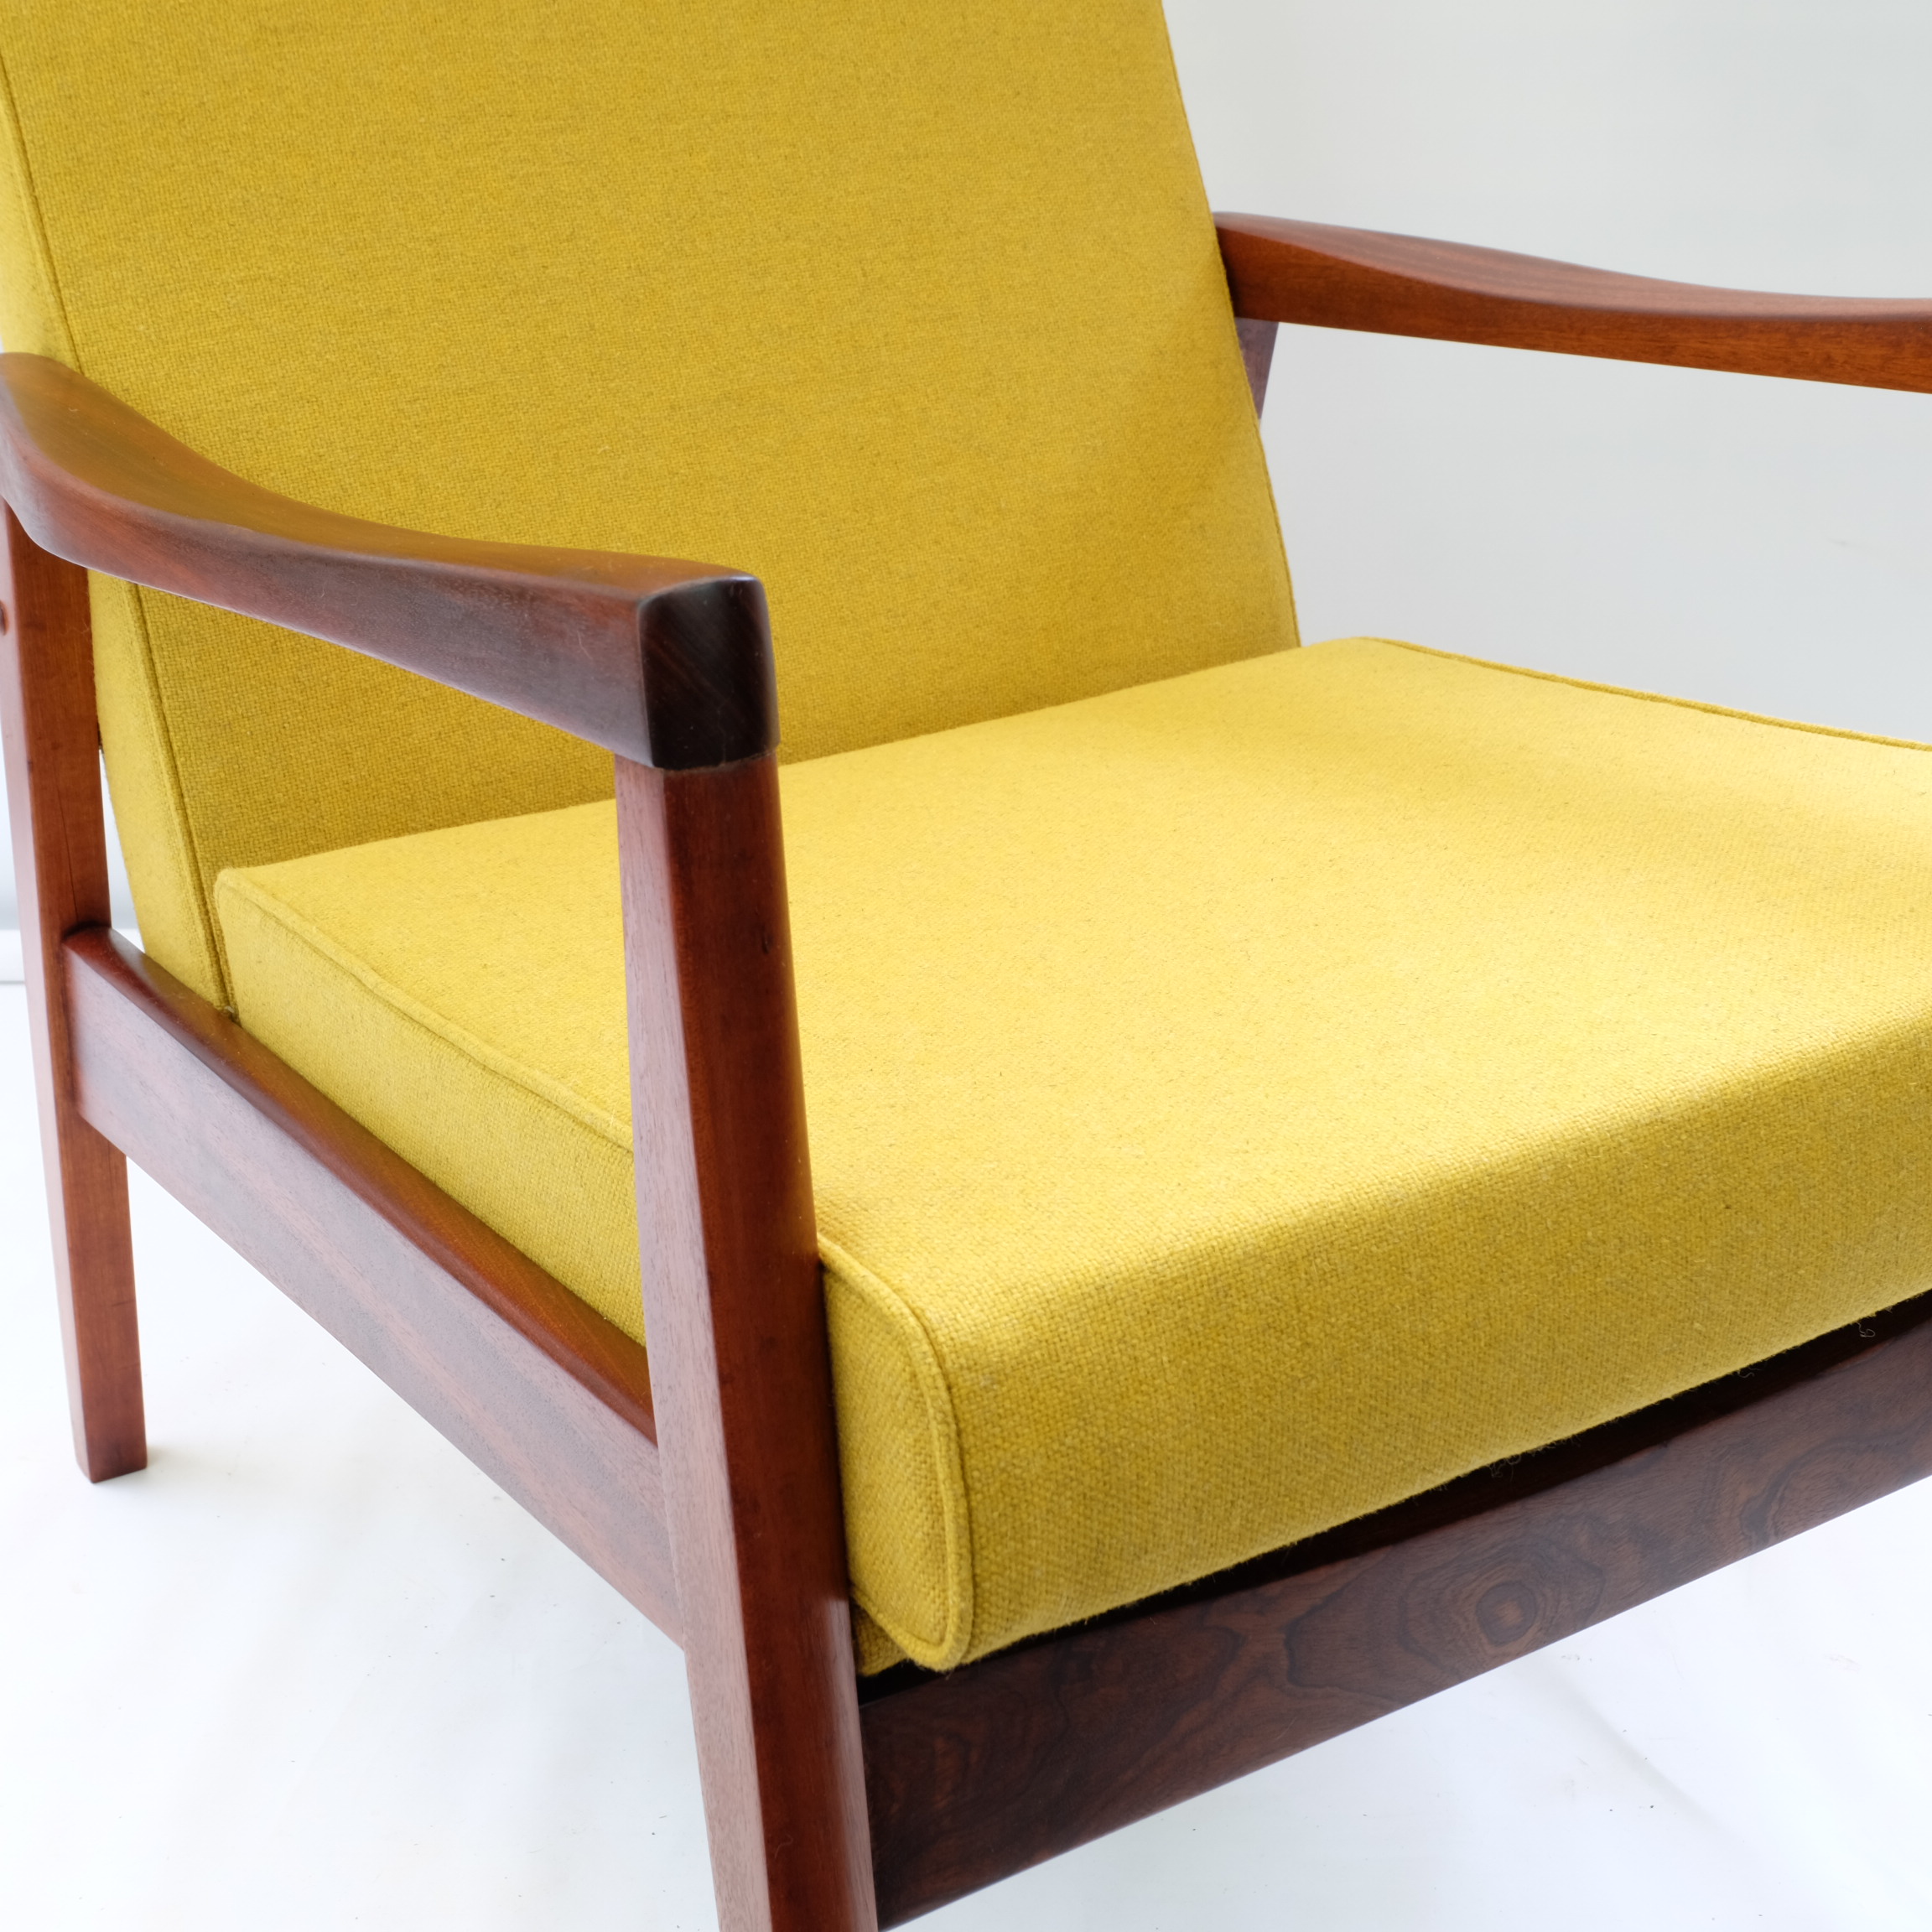 Chair retored using green products listed